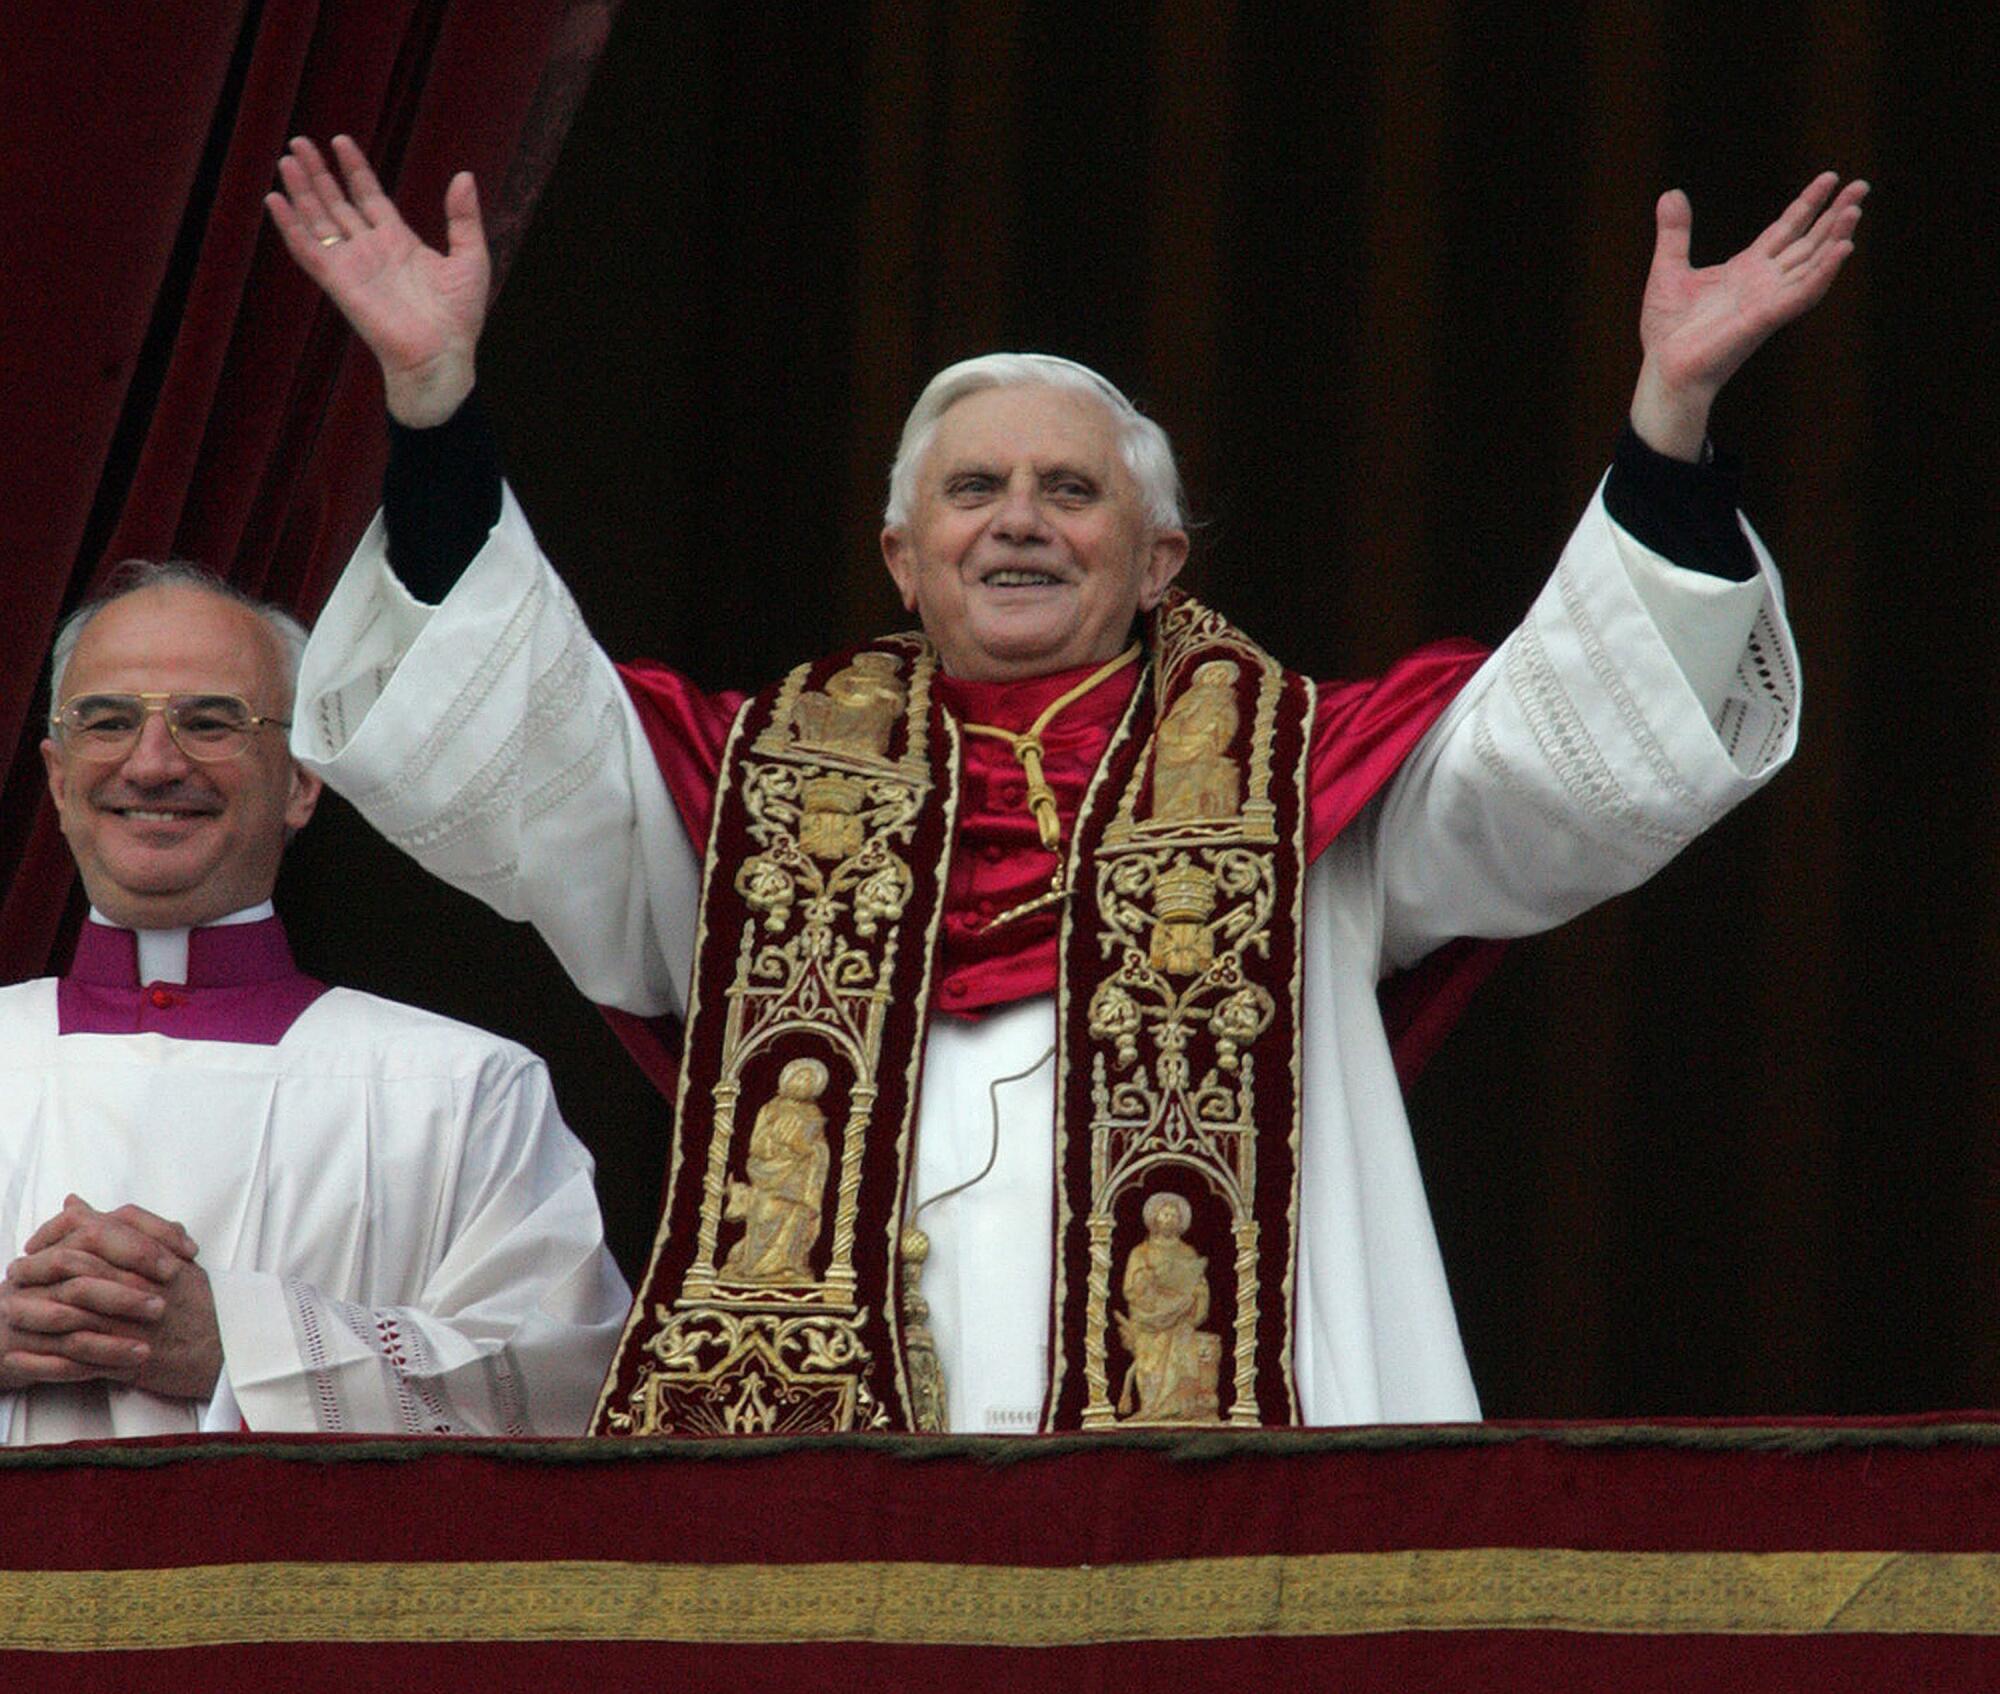 Then Pope Benedict XVI raises his hands to greet the crowd from St. Peter's Basilica moments after being elected.